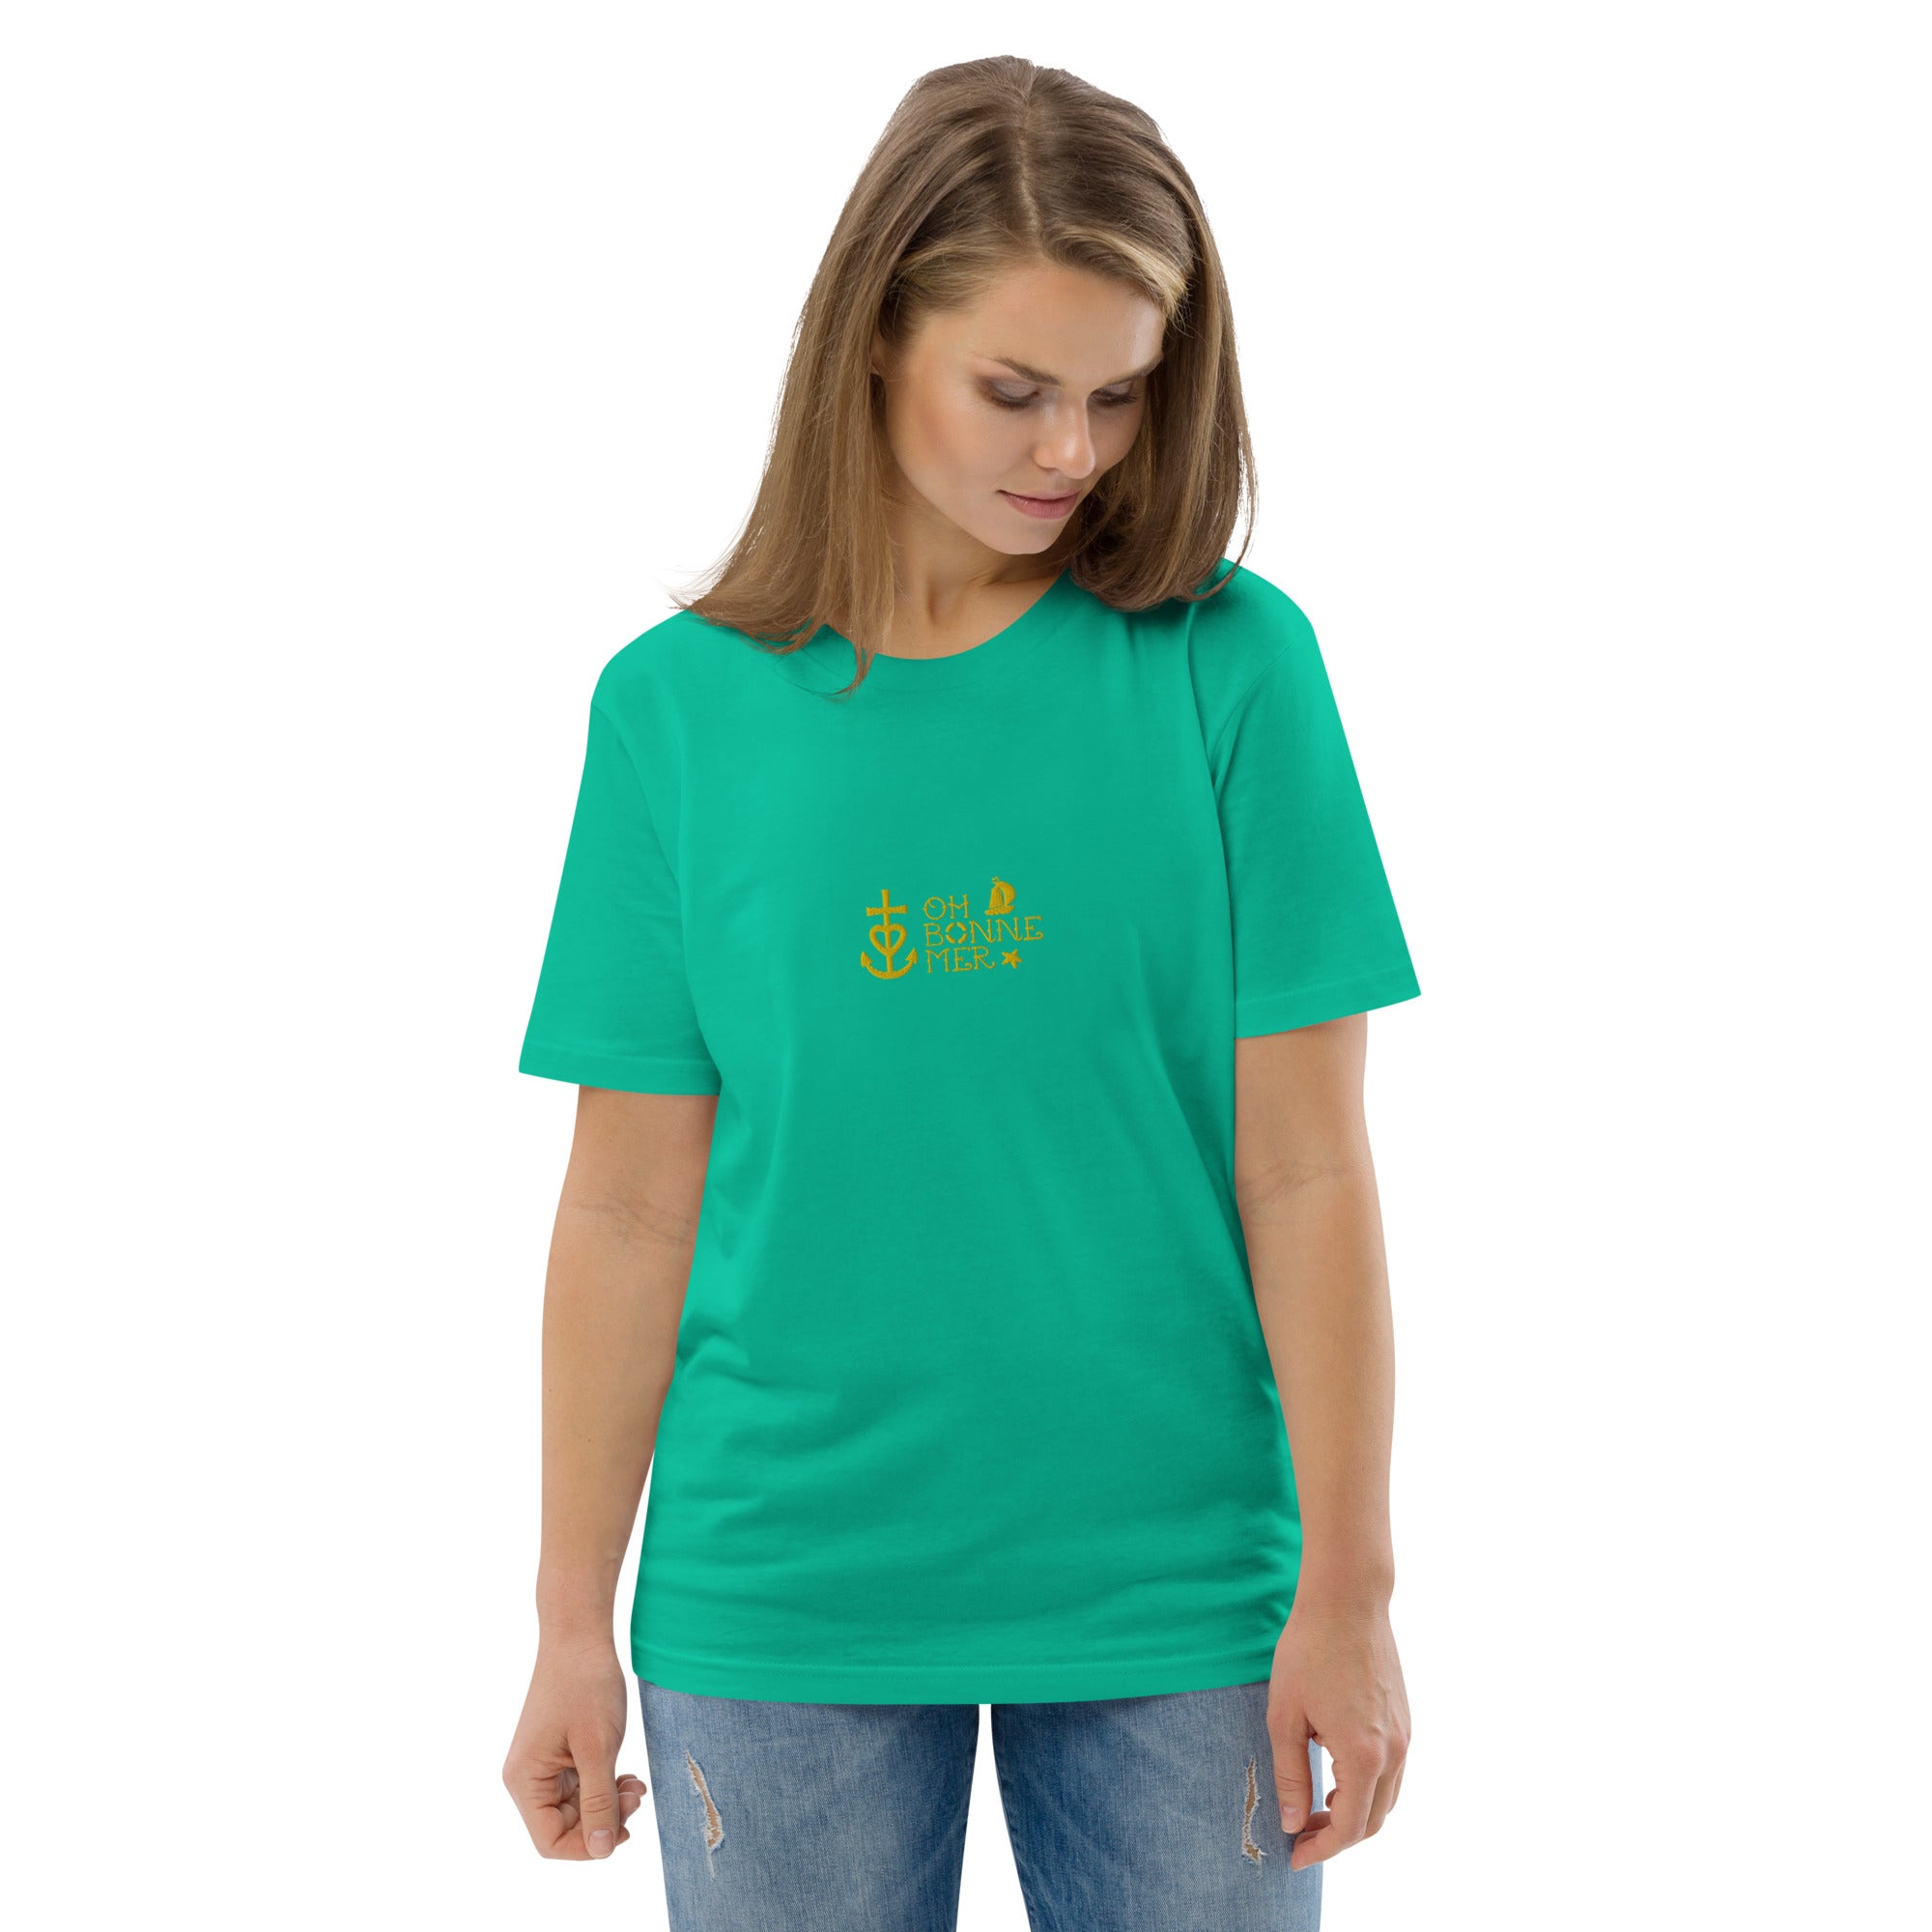 Unisex organic cotton t-shirt Oh Bonne Mer 2 embroidered pattern on bright colors